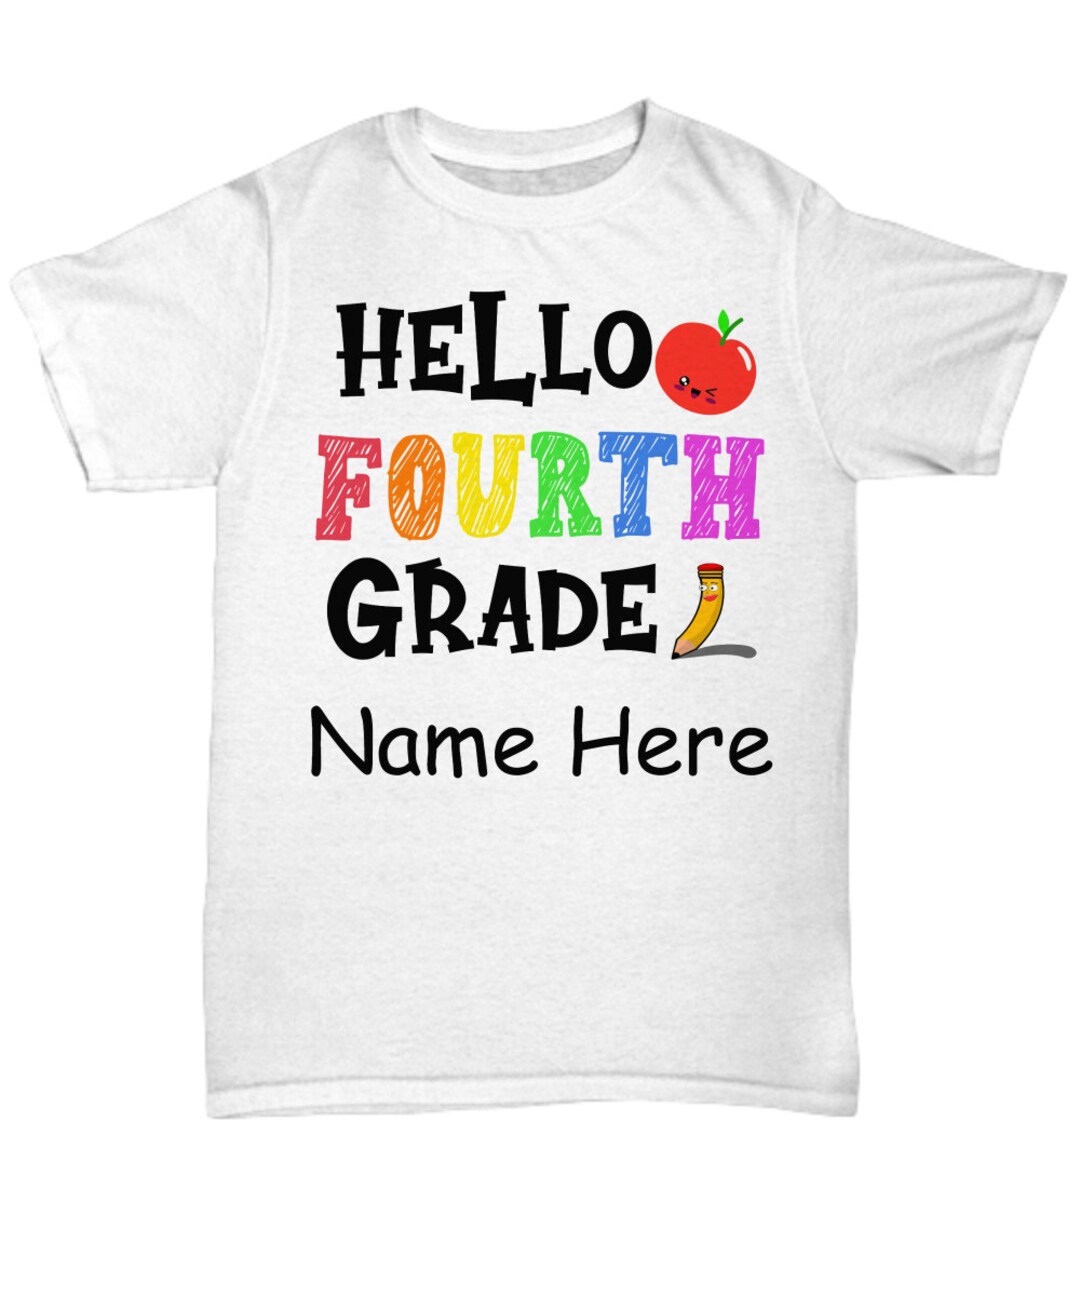 Tee Shirt Students T-shirt or for Teachers to Etsy School 4th First Day School - Back Grade Fourth Personalized Grade Hello of